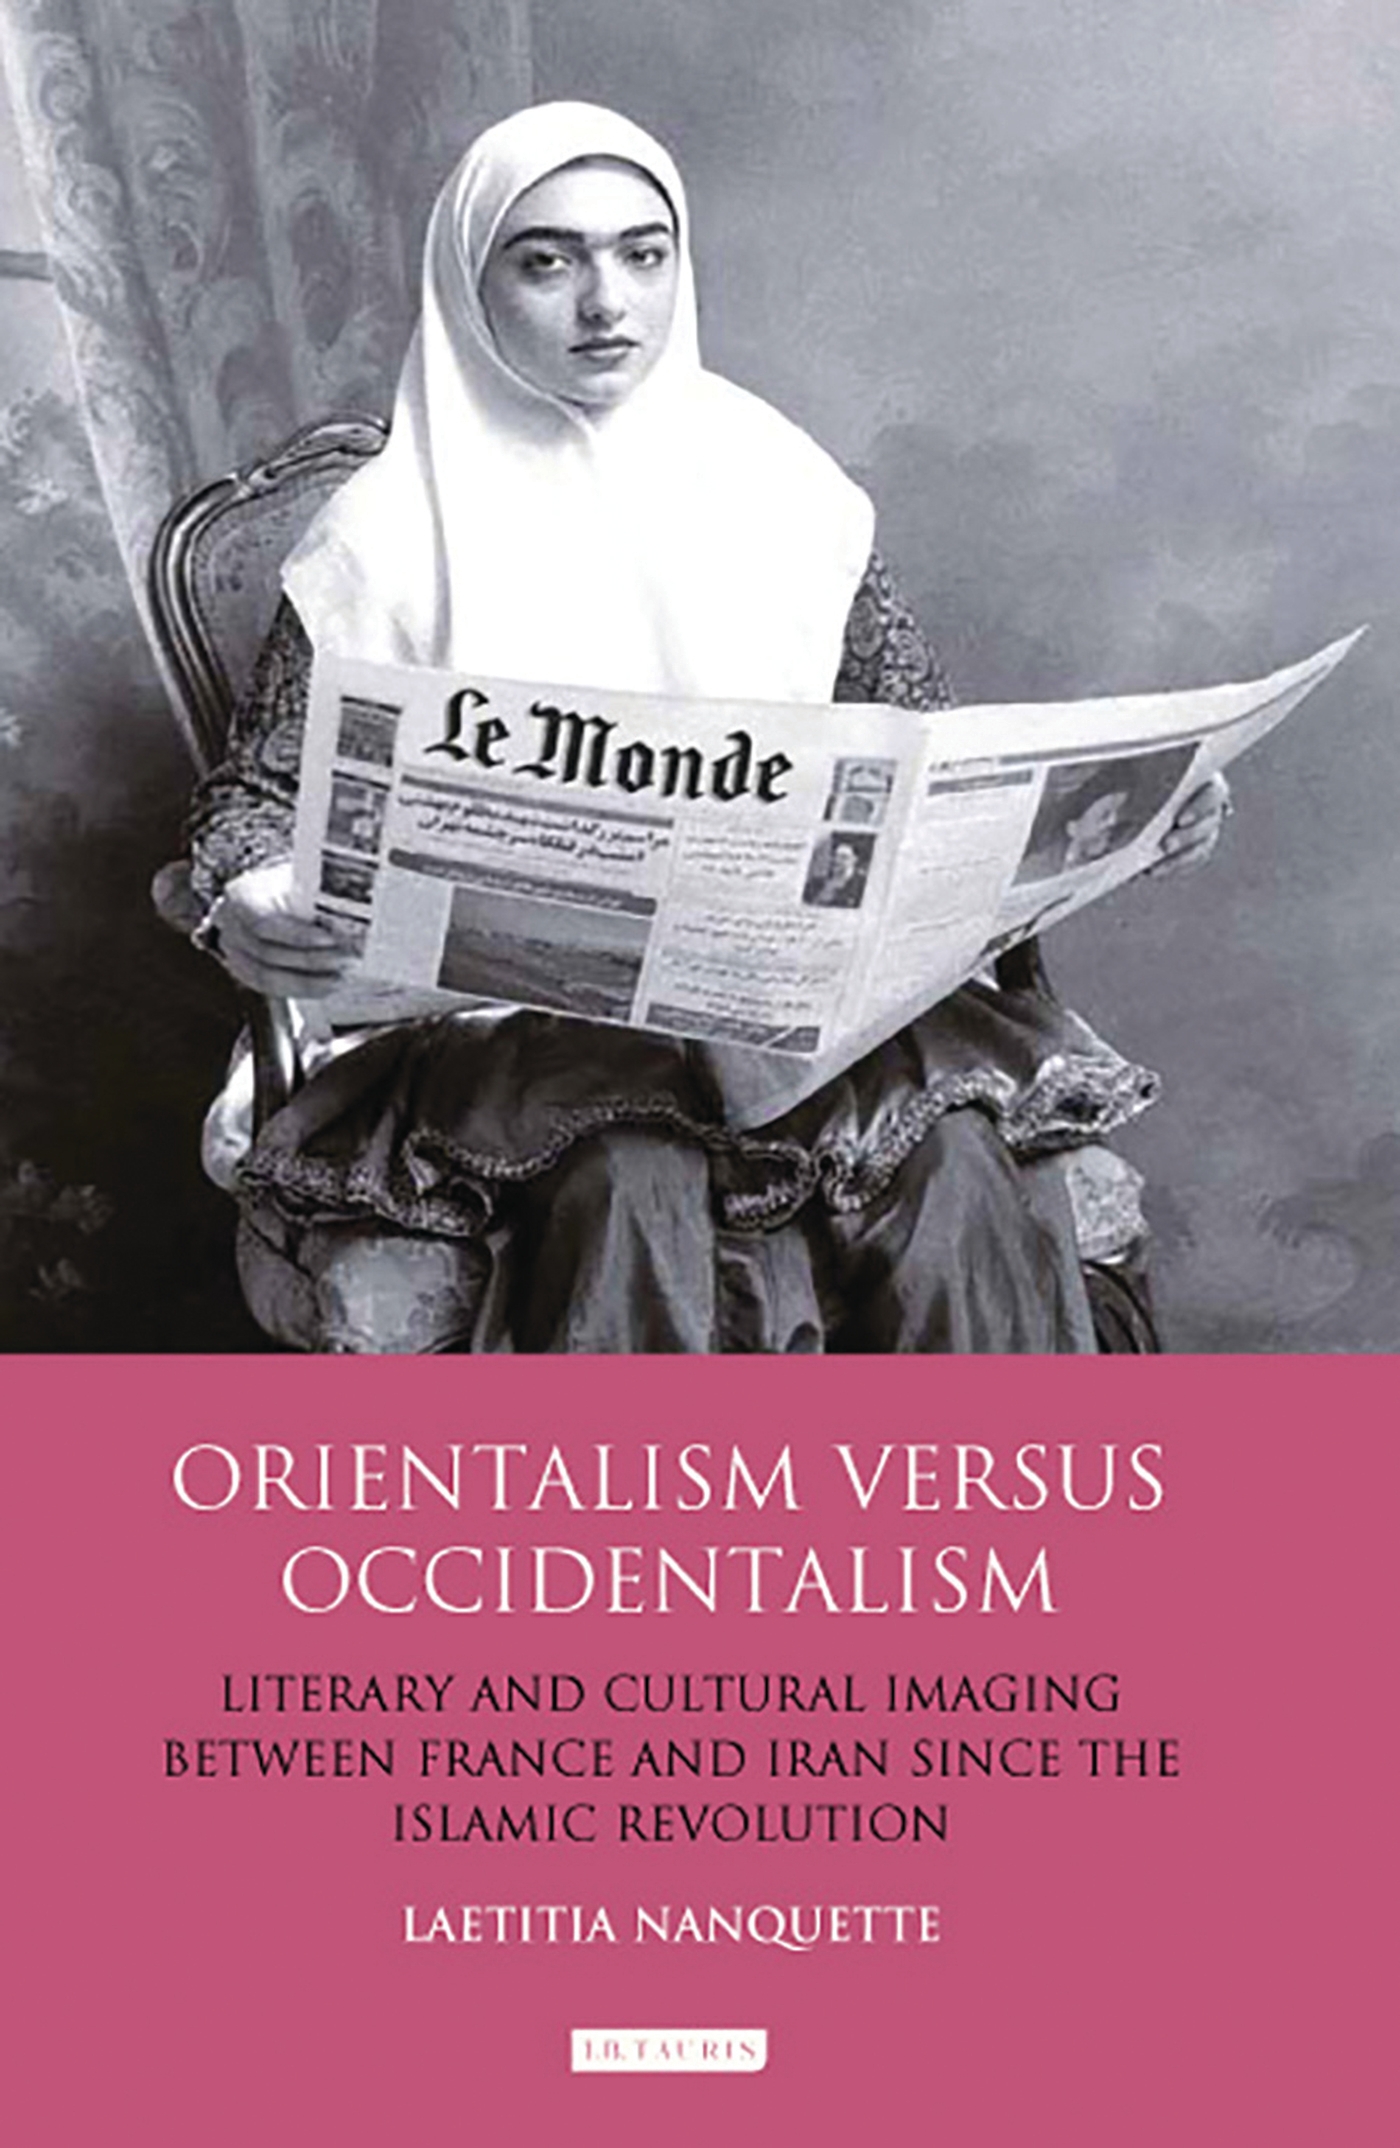 Orientalism Versus Occidentalism: Literary and Cultural Imaging Between France and Iran Since the Islamic Revolution Laetitia Nanquette Author